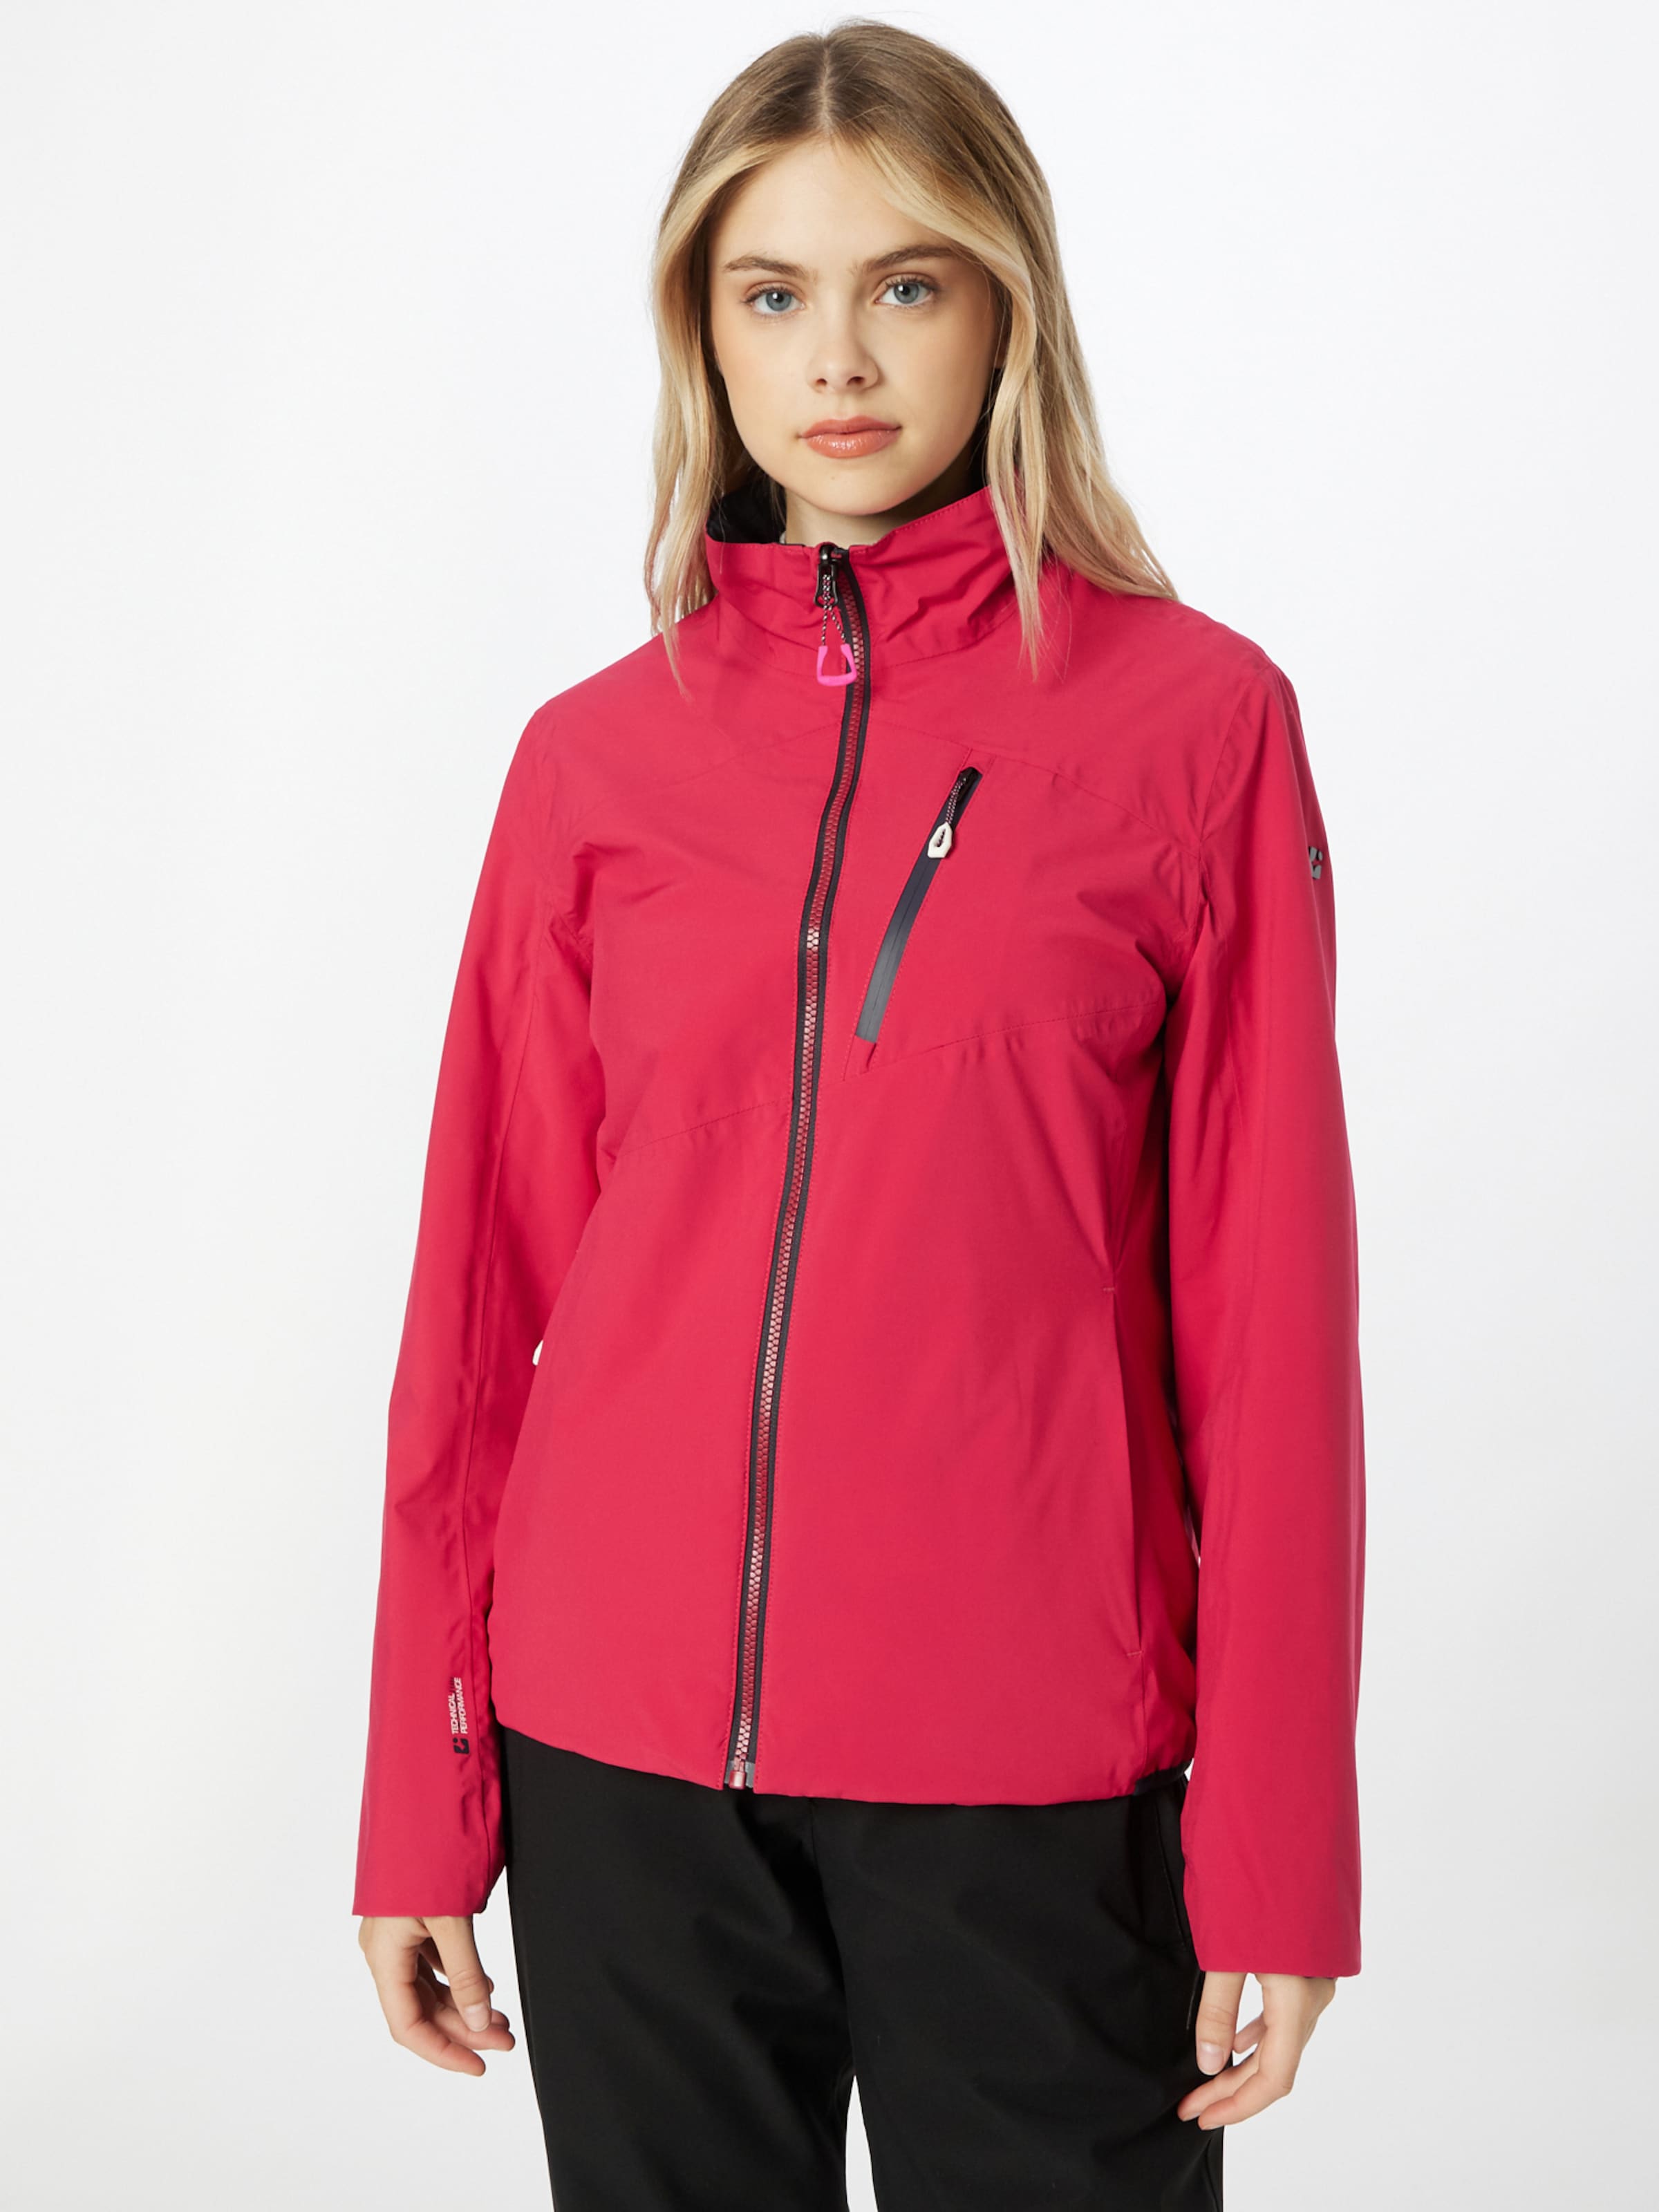 KILLTEC Outdoor Jacket 'KOW' in Navy, Bright Red | ABOUT YOU